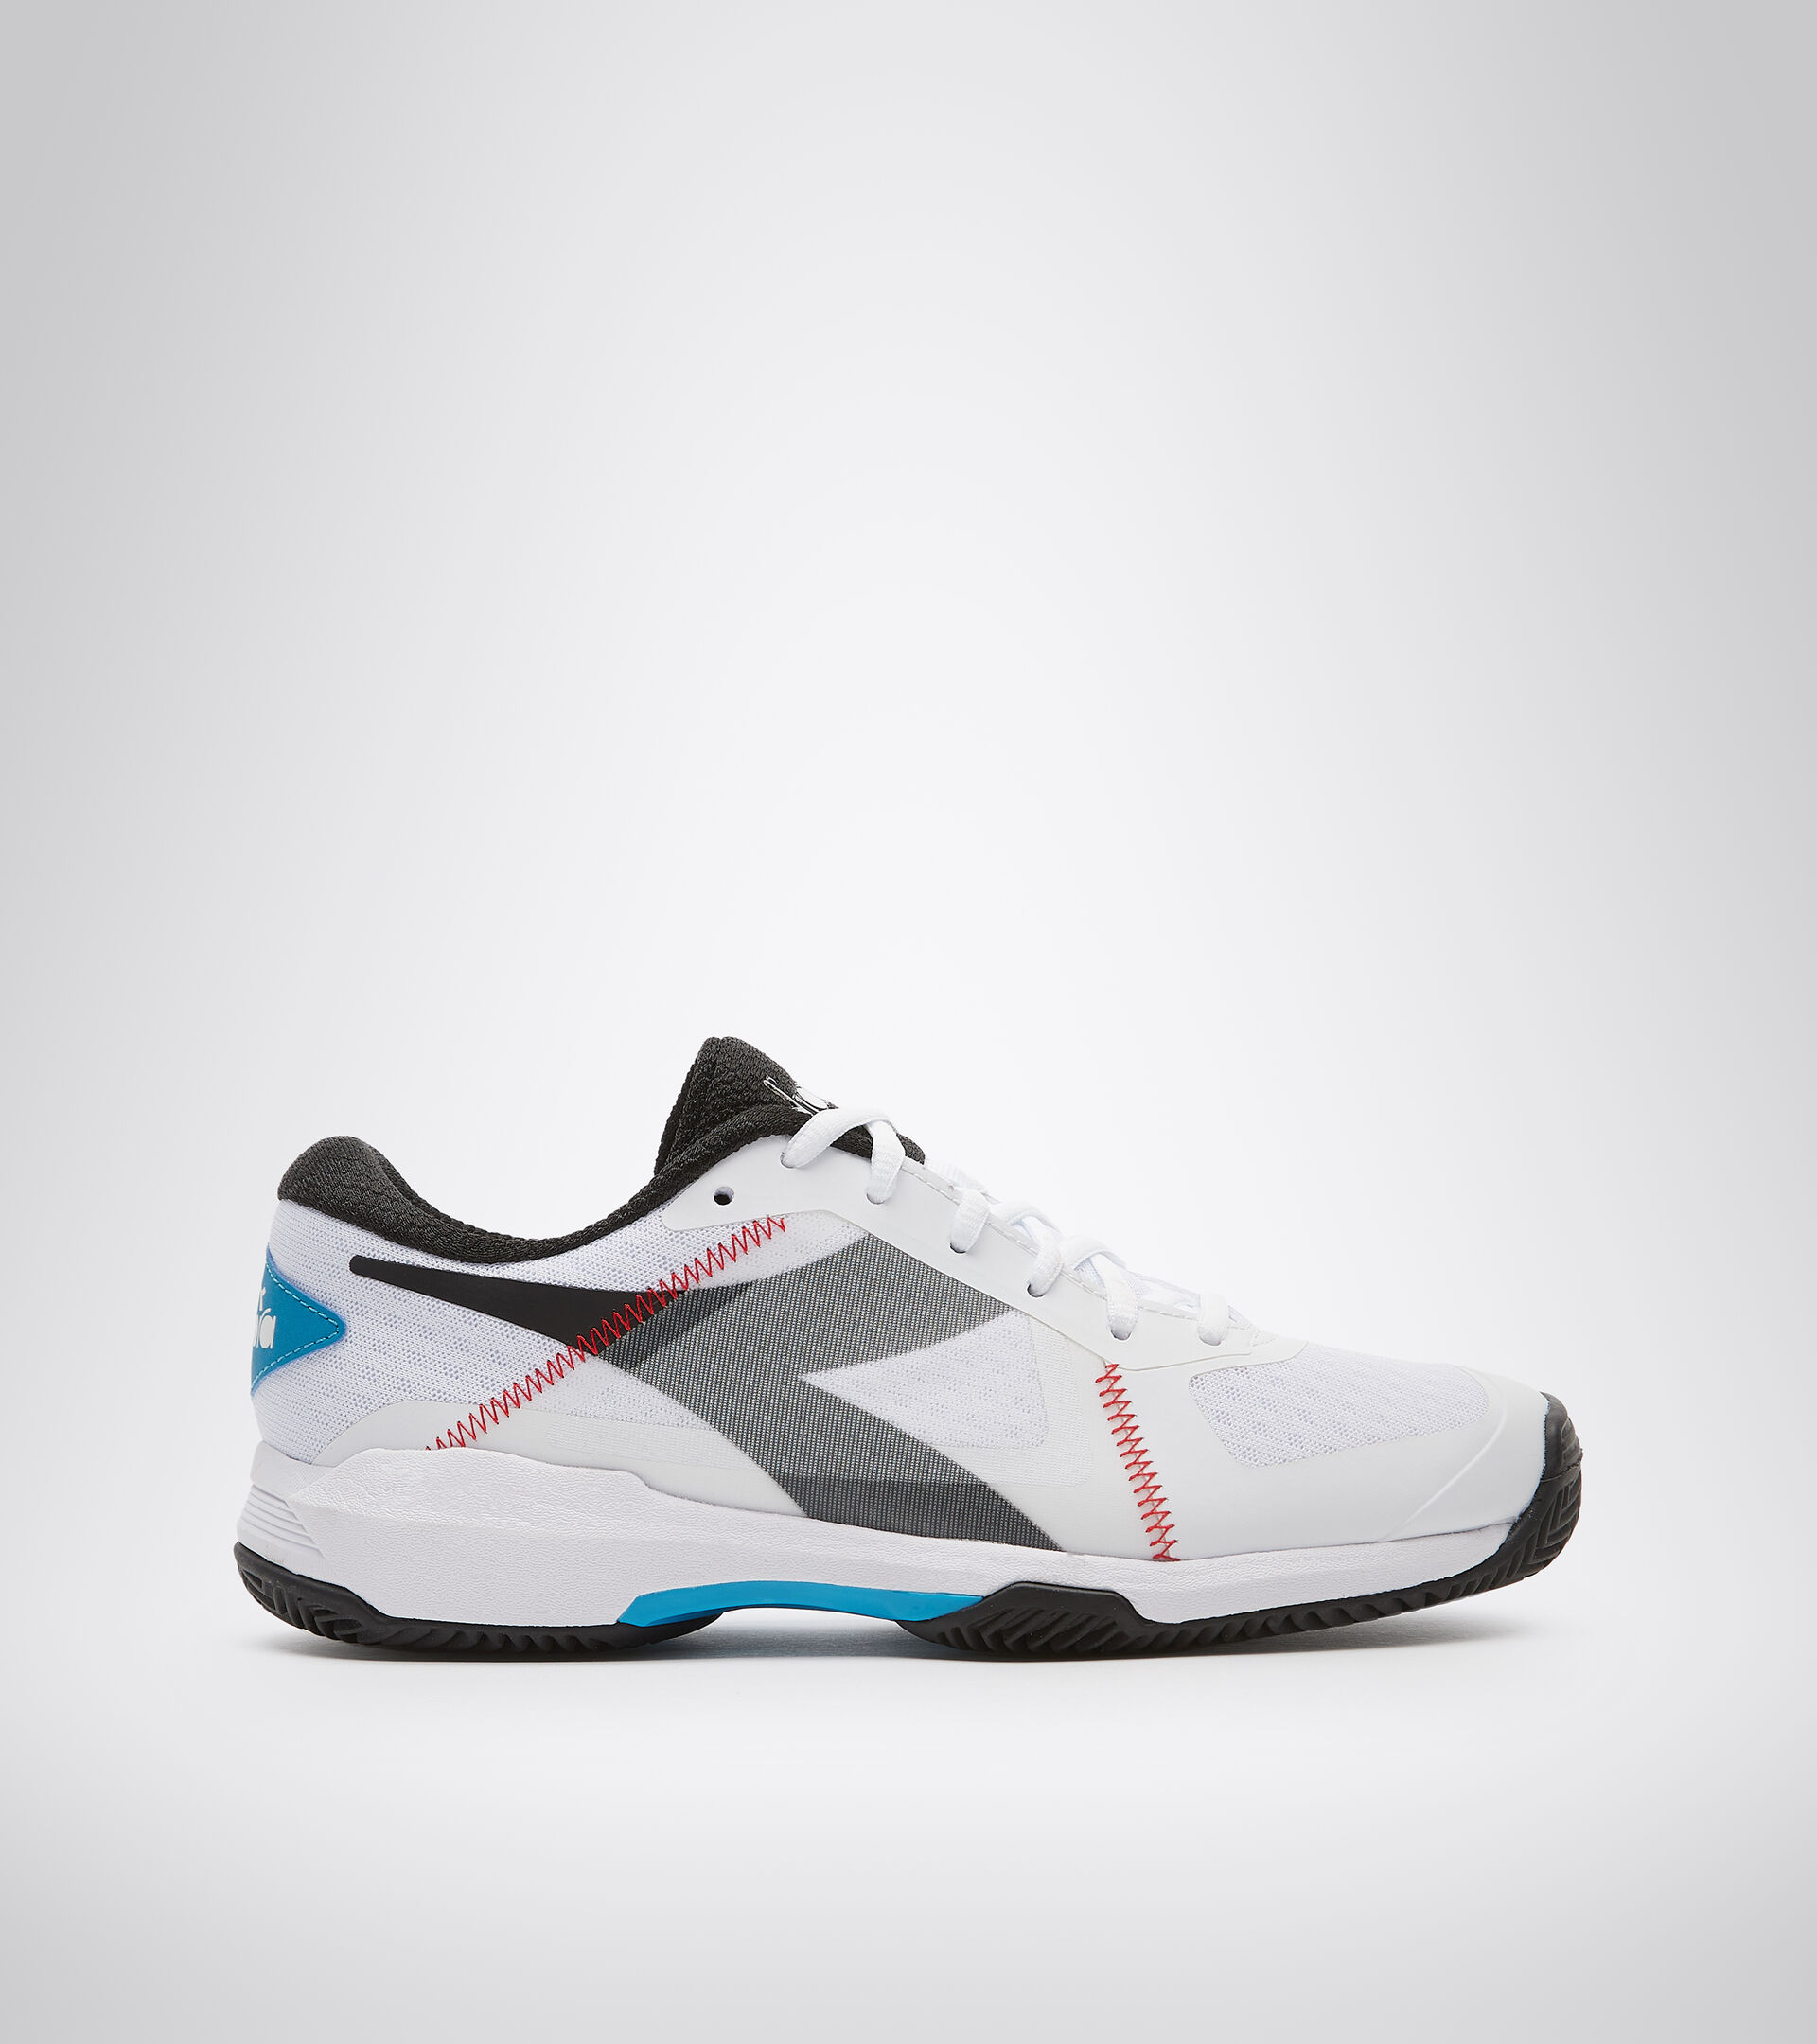 TROFEO CLAY Tennis shoes for clay courts - Men - Diadora Online Store US